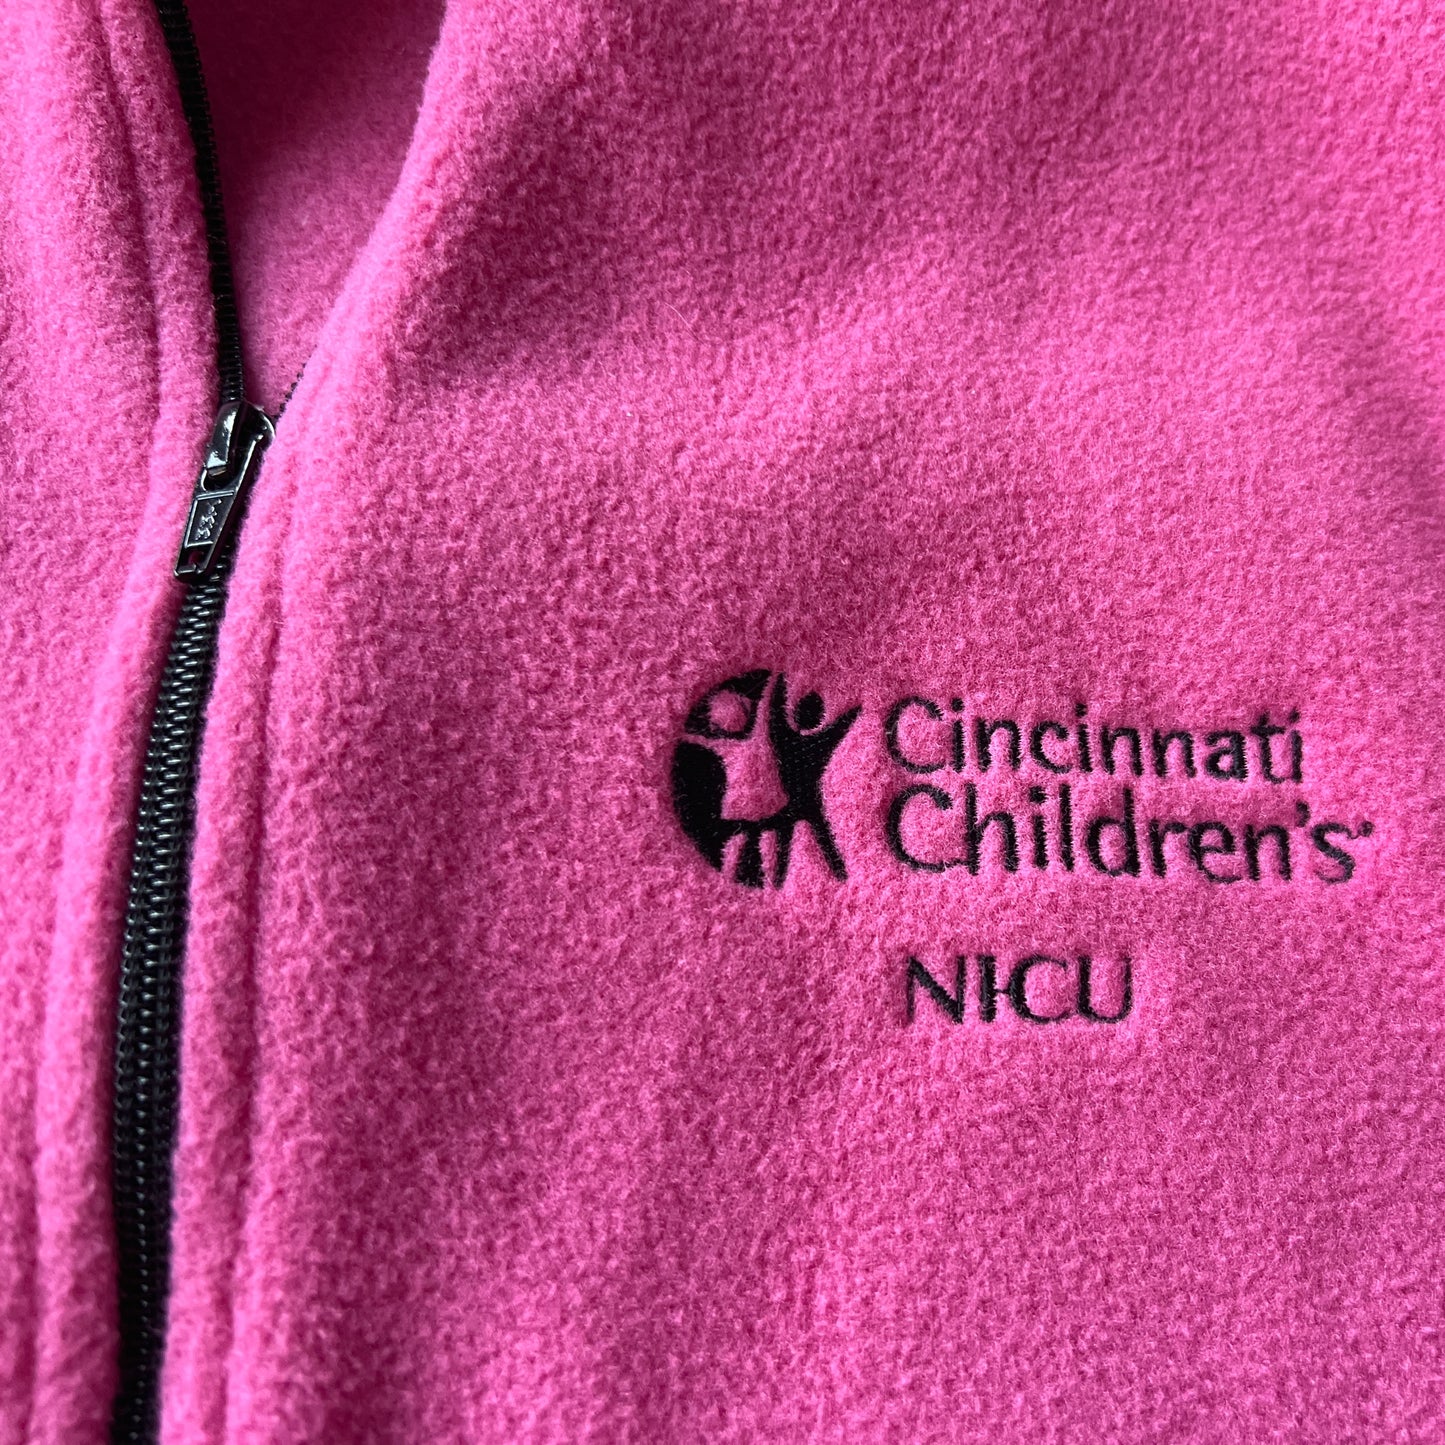 Cincinnati Children’s NICU pink fleece zip-up (old logo), size is ‘Ladies large,’ zippered pockets and drawstrings at the waist for adjustable fit, VGUC (worn once or twice)